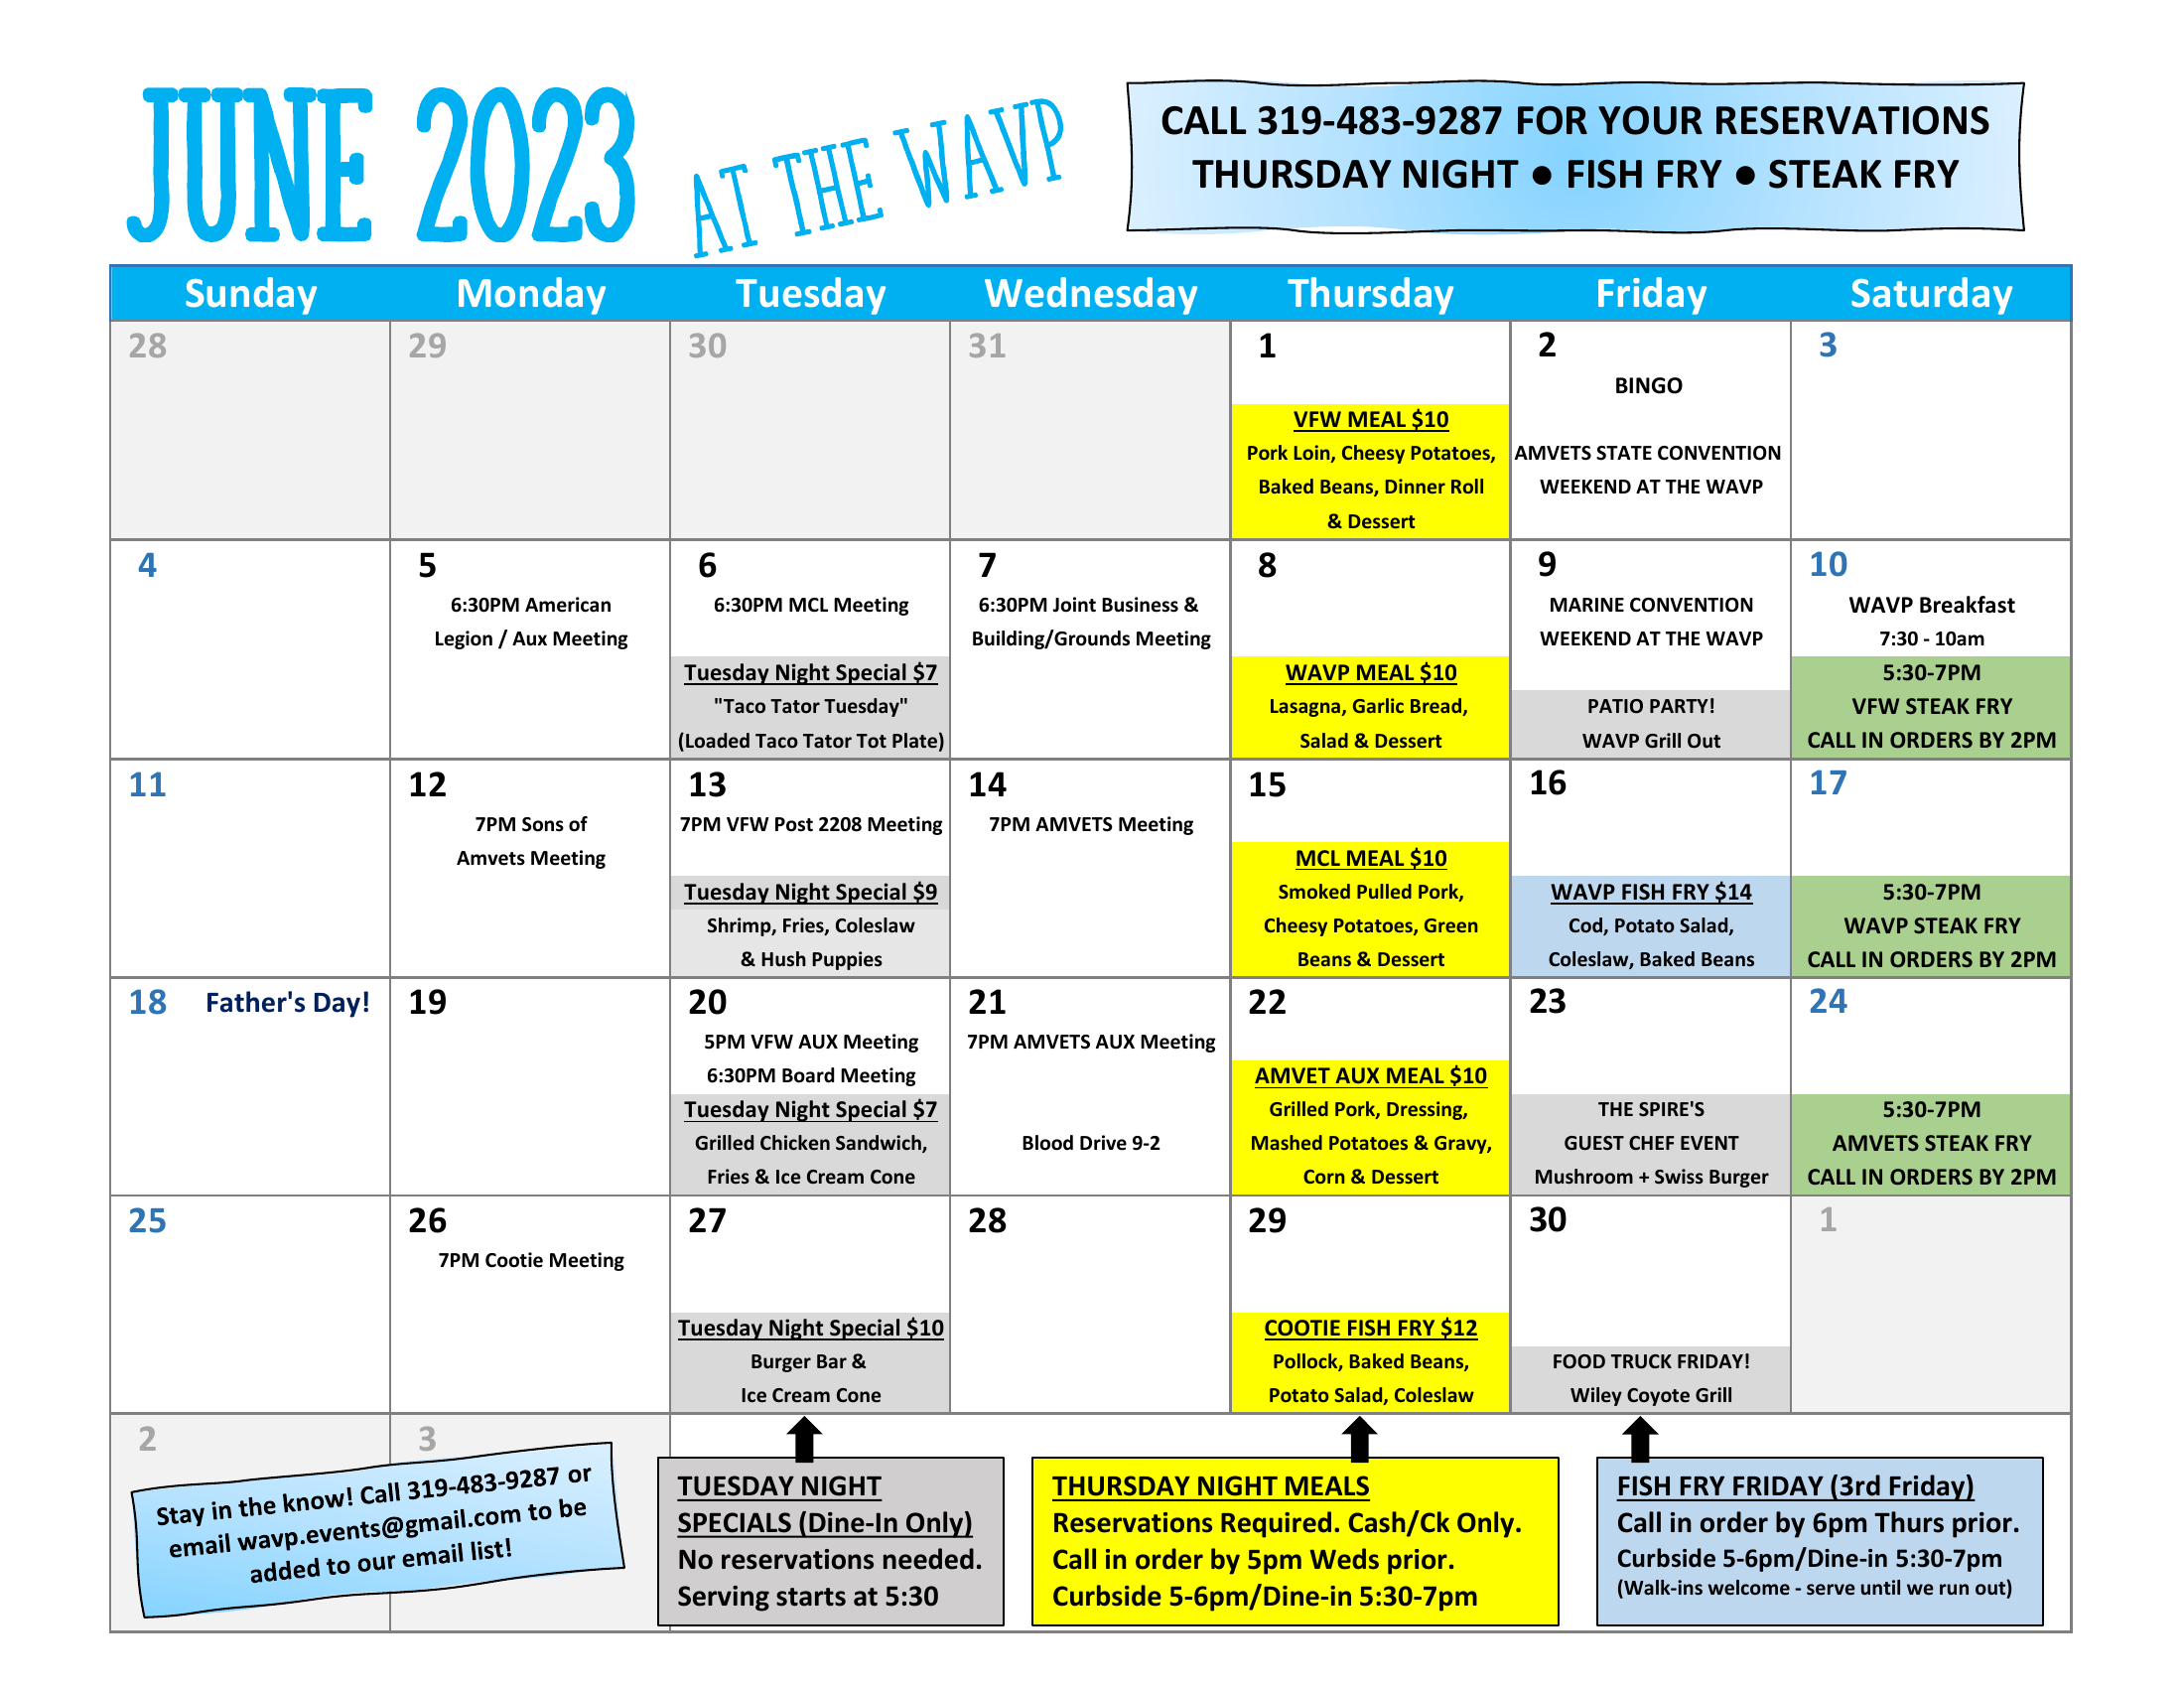 The WAVP Events Calendar for the month of June 2023